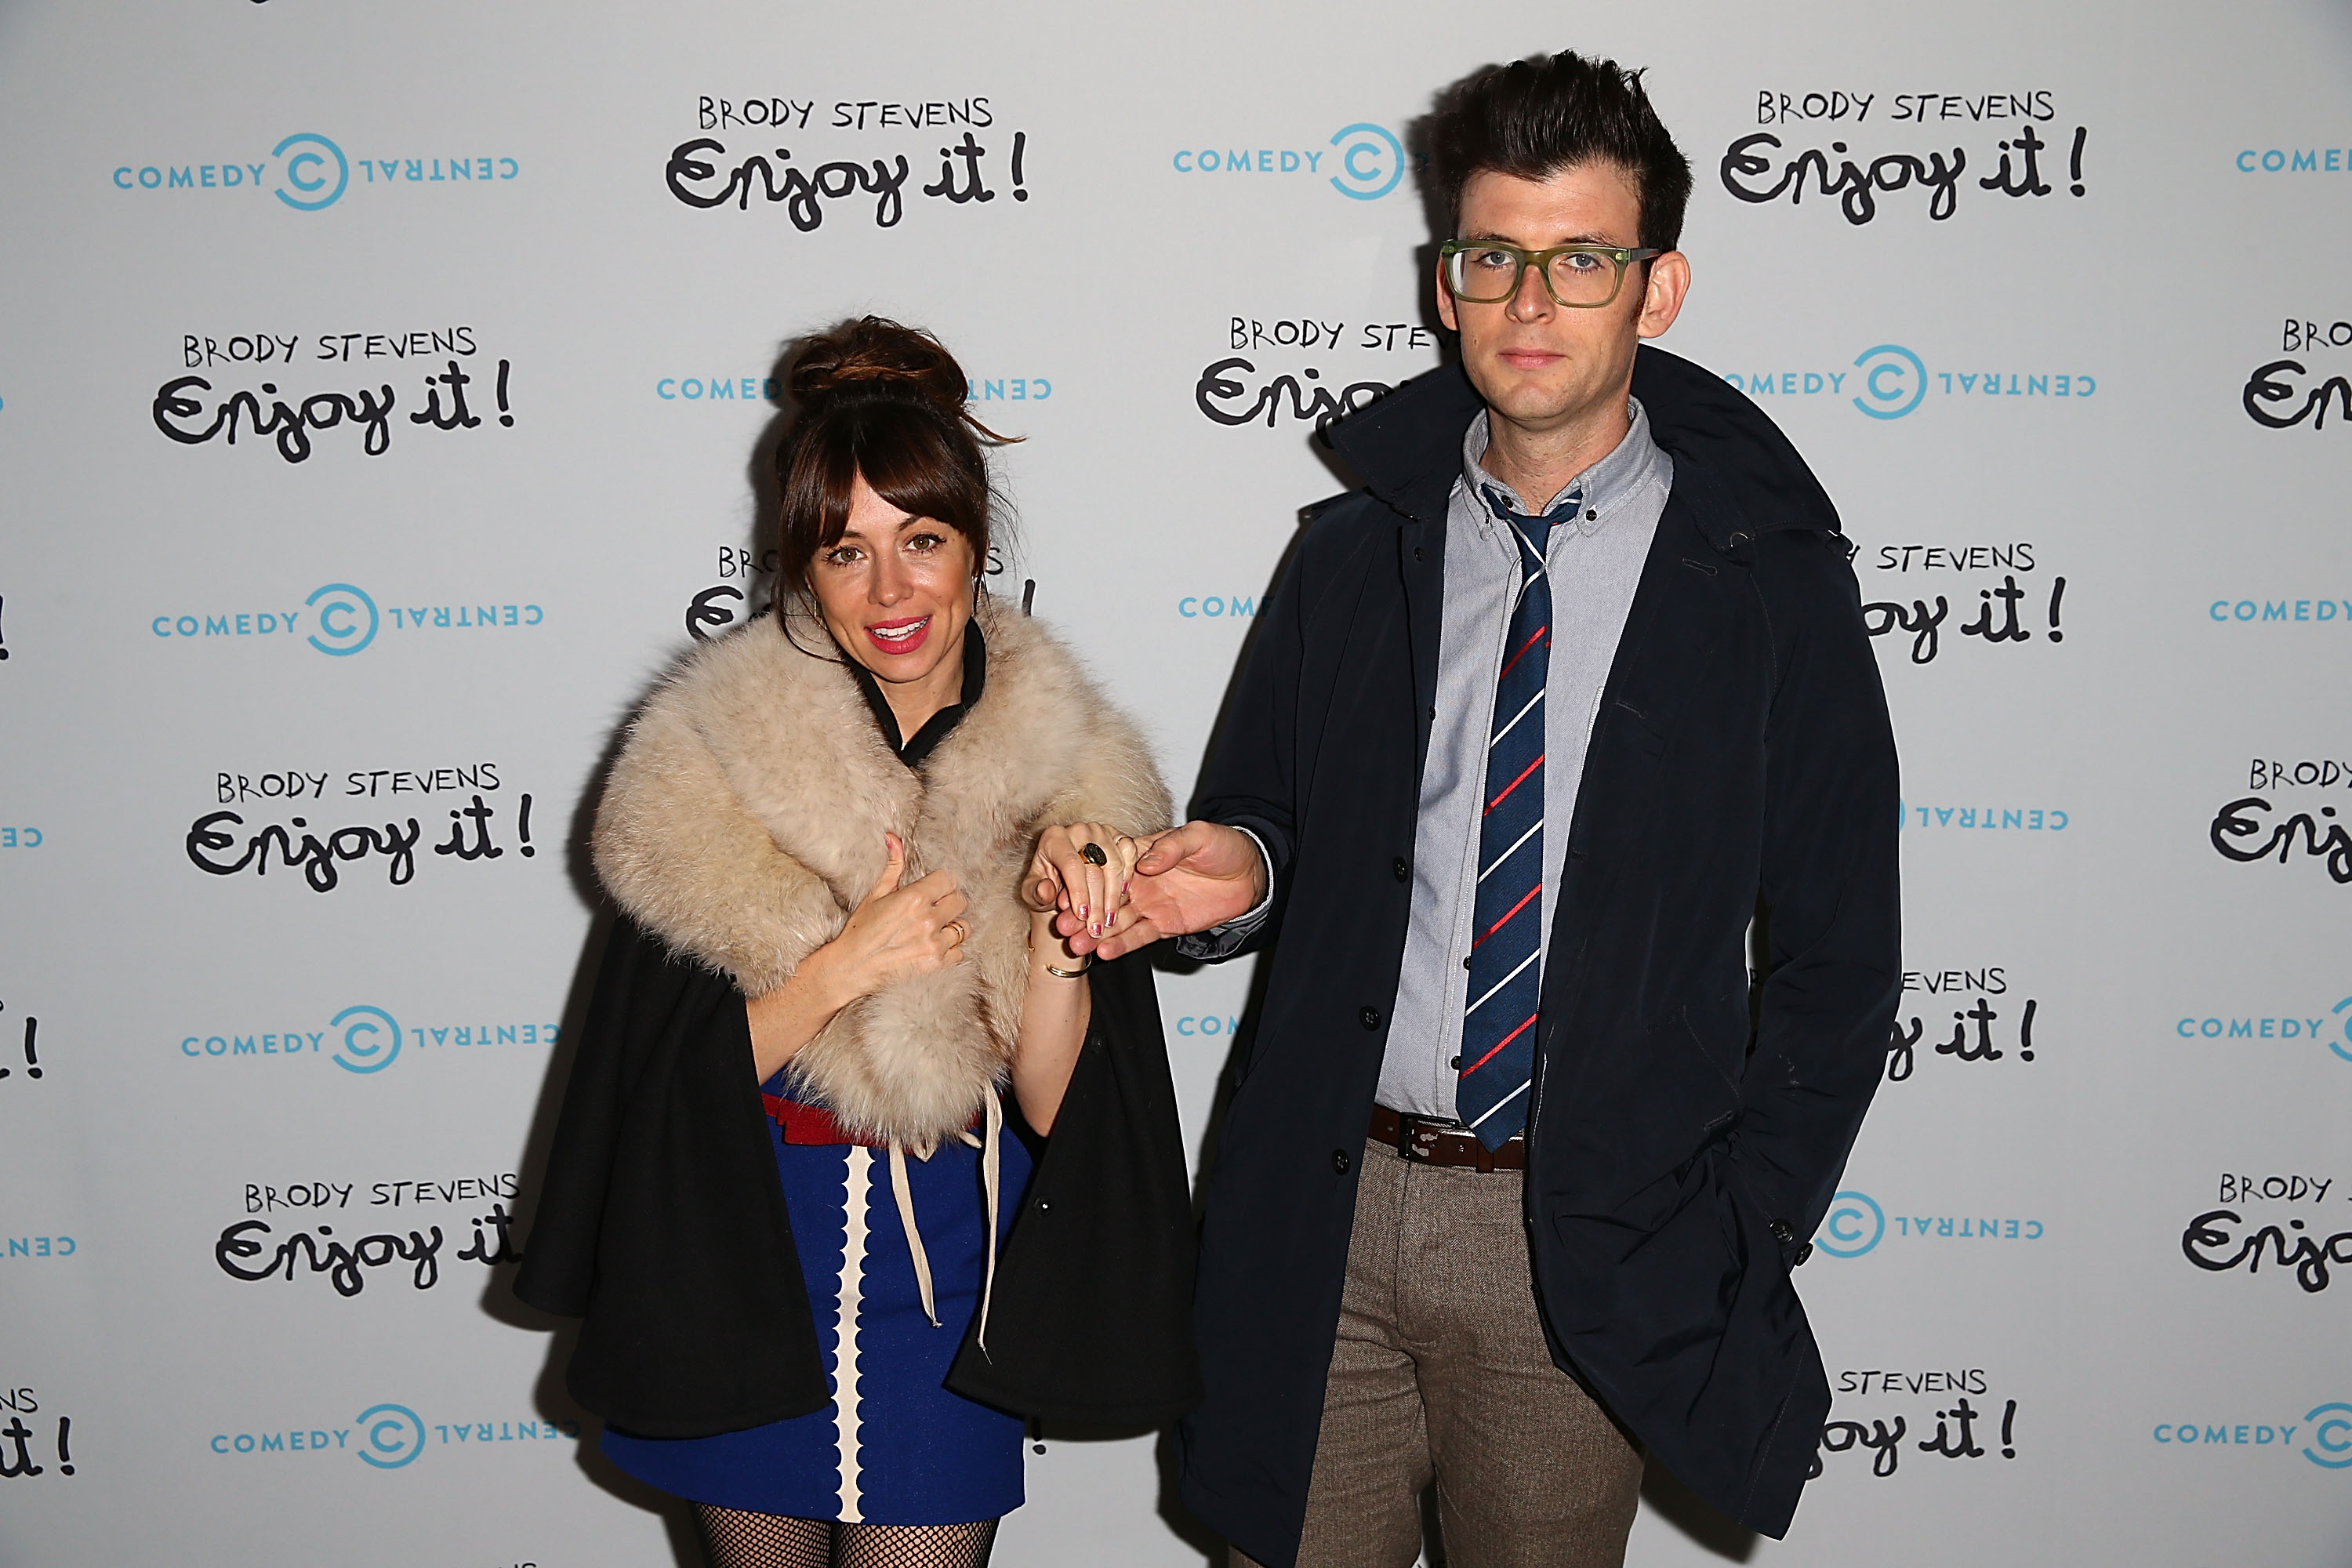 Natasha Leggero and Moshe Kasher arrive at the "Brody Stevens: Enjoy It!" Premiere Party at Smogshoppe, on November 21, 2013, in Los Angeles, California. | Source: Getty Images